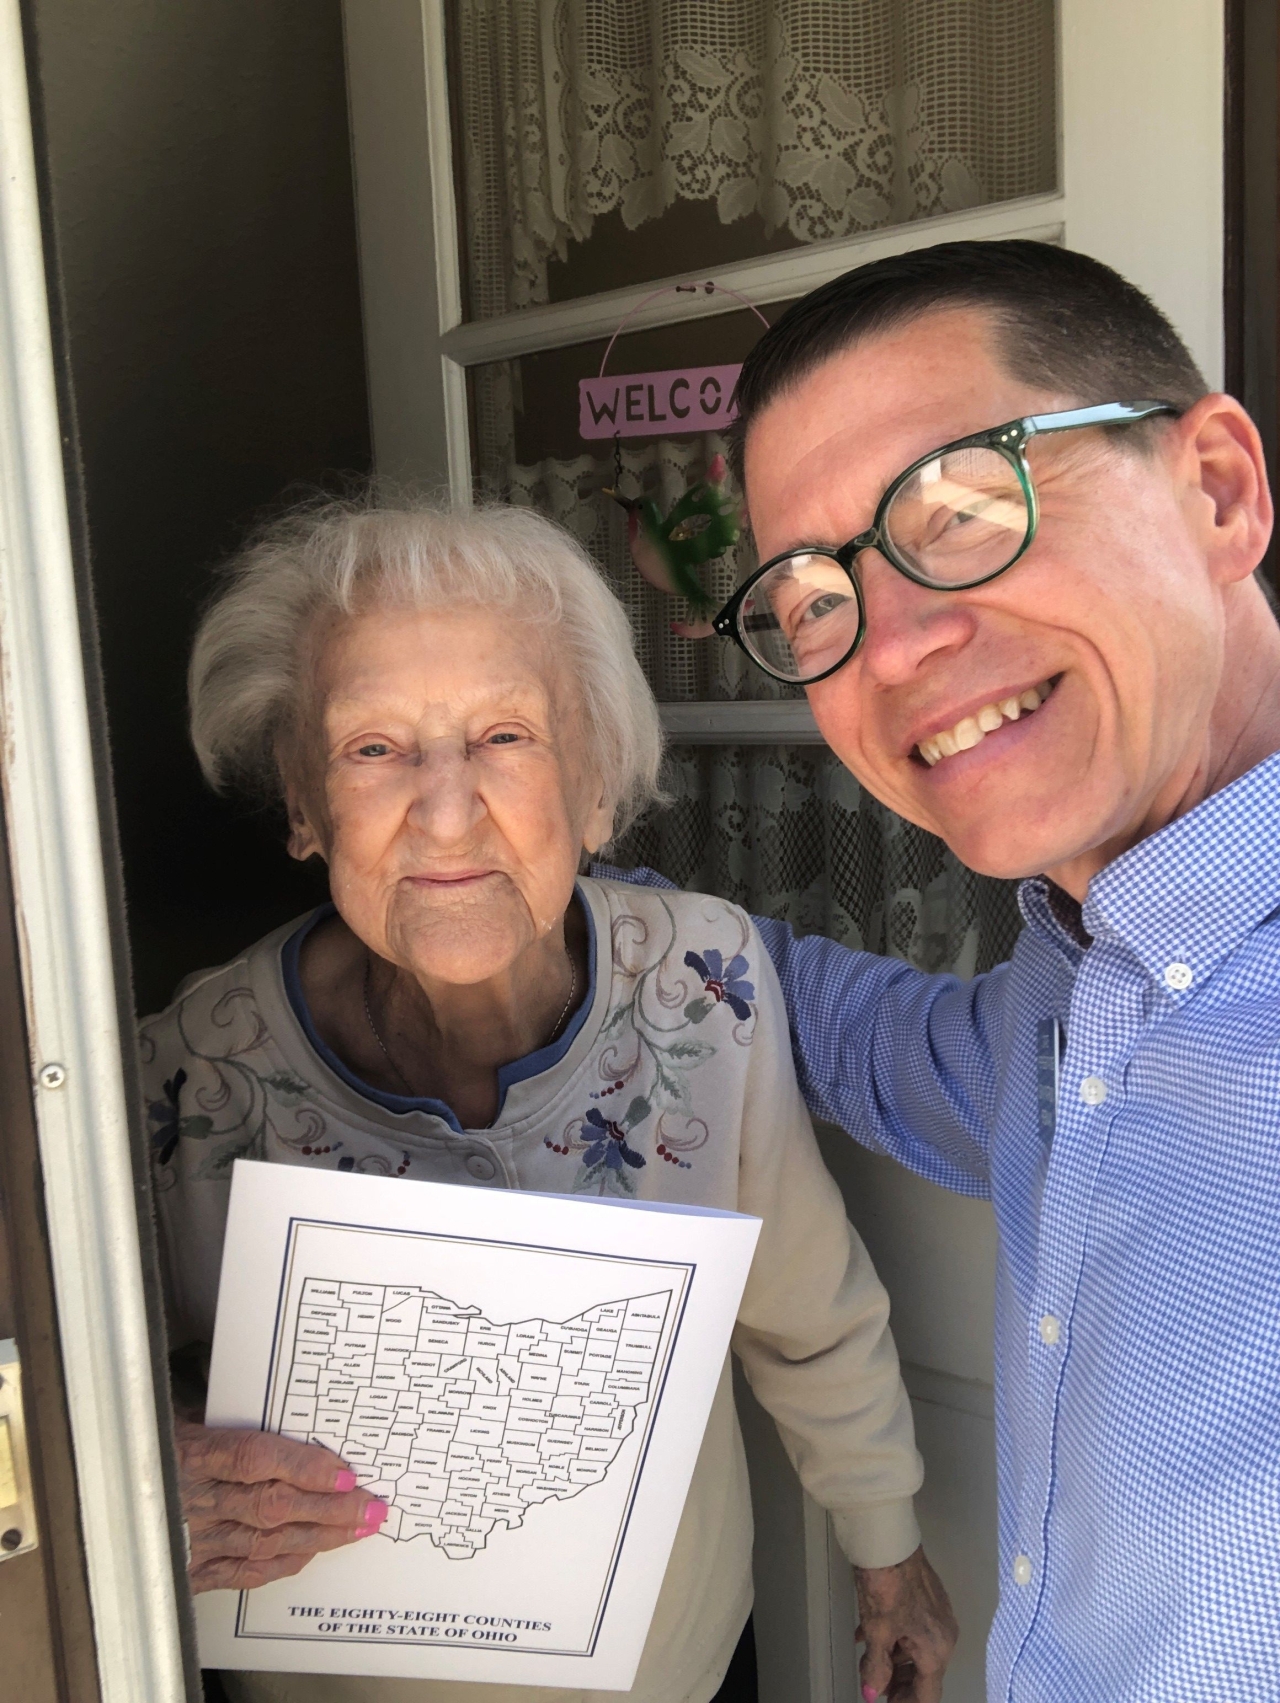 Happy birthday to Mrs. Jeanette M. Garcia who turned 101 in May!  Rep. Brennan had the distinct honor of meeting her at her home in Parma Heights right before her birthday.